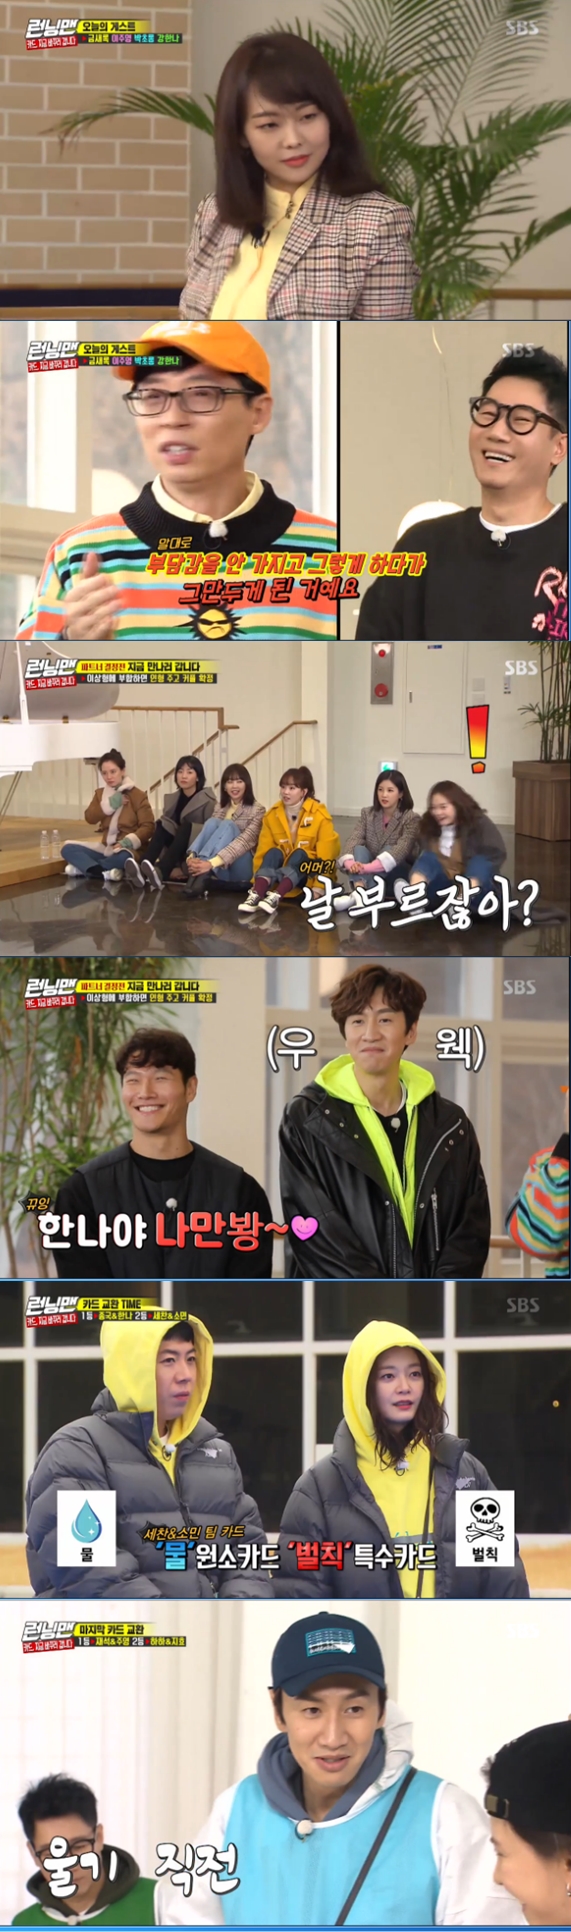 Yoo Jae-Suk, Lee Ju-young couple have won the prize.In the SBS entertainment program Running Man broadcasted on the night of the 19th, Keum Sae-rok, Lee Ju-young, Park Cho-rong and Kang Han-Na came out as guests and performed Card Now Im going to change Race with the members.The members gathered at the opening place applauded Yoo Jae-Suk when he appeared, saying, The Grand Prize, the New Artist Award winner.Yoo Jae-Suk said, Now I have completed all the lineups on the top. Haha said, I have not filled one prize yet.I havent received the SNS Star Award yet, he said, looking at Lee Kwang-soo.Yoo Jae-Suk teased Lee Kwang-soo, saying he did not receive a clean-up prize with the SNS Star Award.Lee Kwang-soo said, I only receive the first name I hear. Thank you for the award, he bowed to viewers.Yoo Jae-Suk said, Thank you for giving us great love.Guests this week included Keum Sae-rok, Lee Ju-yeong, Park Cho-rong and Kang Han-Na as guests.Members were enthusiastically welcomed when Keum Sae-rok, who had a huge amount of talent in his last Running Man appearance, appeared.Keum Sae-rok said, I did not have any close friends in my last appearance, so this time I came out with Lee Ju-yeong.Yoo Jae-Suk laughed, saying, Ji Suk-jin has never put an acquaintance in nine years, but he has put an acquaintance in only two appearances.Yoo Jae-Suk then saw Kang Han-Na, who reappeared in three weeks, and said, Is not it a family now?He said, I made a good strategy, he said, Is not this a member of the party? Kang Han-Na did not deny it.Yoo Jae-Suk told Kang Han-Na, I do not have an interview anymore.Kang Han-Na said he had started radioing himself and said that he was transformed into a DJ who raises volume.She then said, I want to hear the radio progress know-how from Ji Suk-jin.Yoo Jae-Suk laughed, saying, If you do like Ji Suk-jin, you will stop radio.After the opening interview, the members and guests conducted a couple game.Yang Se-chan, who became the first runner, said he likes single-headed hair and Jeon So-min started alone.When I saw Jeon So-min, Yang Se-chan said, Can I wait a little longer? But the smile did not leave my face.Yang Se-chan handed the doll to Jeon So-min, saying, I will do what my heart tells me.Jeon So-min was embarrassed and said, What if you accept it right now? But the smile did not leave her face.Yoo Jae-Suk laughed at Kim Jong-kook, saying, If you play a couple game, you may actually meet.When Kim Jong-kook, the month of the couple Game, appeared, Lee Ju-yeong and Keum Sae-rok came out to make a couple together.But Kim Jong-kook was awkward, saying, Why are you two... when Kang Han-Na came out late, Kim Jong-kook was glad to say, Why are you coming out now?But Kang Han-Na didnt get a chance because he didnt make it in time limit; Kim Jong-kook eventually surprised everyone by refusing both.Keum Sae-rok, who was rejected by Kim Jong-kook, re-entered the challenge to couple with Ji Suk-jin.I came out hearing rumors that I made Kang Han-Na a star, she said.Haha laughed, saying, If I hadnt had a couple with Ji Suk-jin, it would have been better. Ji Suk-jin eventually married Keum Sae-rok.Haha and Song Ji Hyo, Yoo Jae-Suk and Lee Ju-young, Kim Jong-kook and Kang Han-Na, Lee Kwang-soo and Park Cho-rong were the couple.This week, Race was decided whether couples would get penalties or prize money by combining Cards.If the element card and the penalty card were combined, the penalty was awarded, and when the element card and the prize money card were combined, the cuff was awarded.Couples who were in first and second place in each round could have the opportunity to exchange with the Card of the other couple.The first mission was to use the tools to play footwear.In the footwear game where the fierce battle was held, the Bachelor Team, which included Kim Jong-kook, Lee Kwang-soo and Yang Se-chan, won.The chance to replace Card through scissors rock beams among the three teams was given to Yang Se-chan and Kim Jong-kook couple.Kim Jong-kook and Kang Han-Na changed Card with the Yang Se-chan team and only exchanged elements.Yang Se-chan and Jeon So-min decided to exchange Cards with Lee Kwang-soo couple, but they were given a penalty card and received a penalty card.On the second mission, the Yoo Jae-Suk couple and Haha couple won the card exchange.The Yoo Jae-Suk couple exchanged cards with Keum Sae-rok, and received a tree element card.Haha couple get penalty card for exchanging Card with Park Cho-rongOn the final mission, the Yoo Jae-Suk couple and the Haha couple again got a card exchange.The Yoo Jae-Suk couple exchanged Card with Ji Suk-jin to get a water element and acquire a rollover set.Haha couple exchanged Cards with Lee Kwang-soo to win the merchandise card